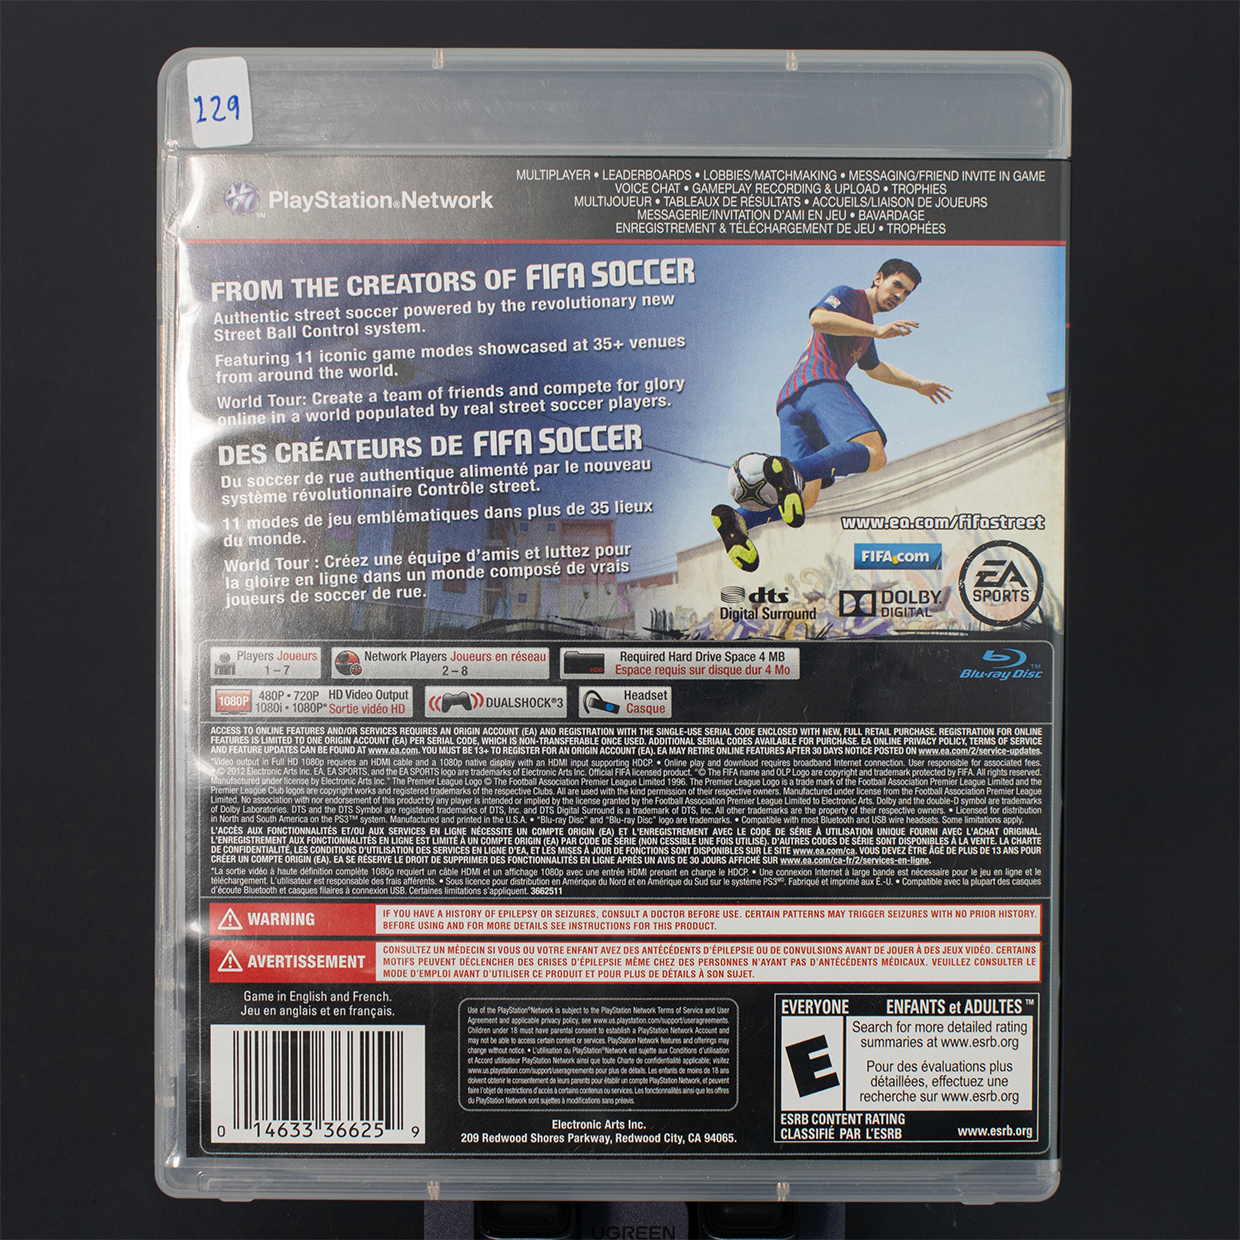 Fifa Street - PS3 Game